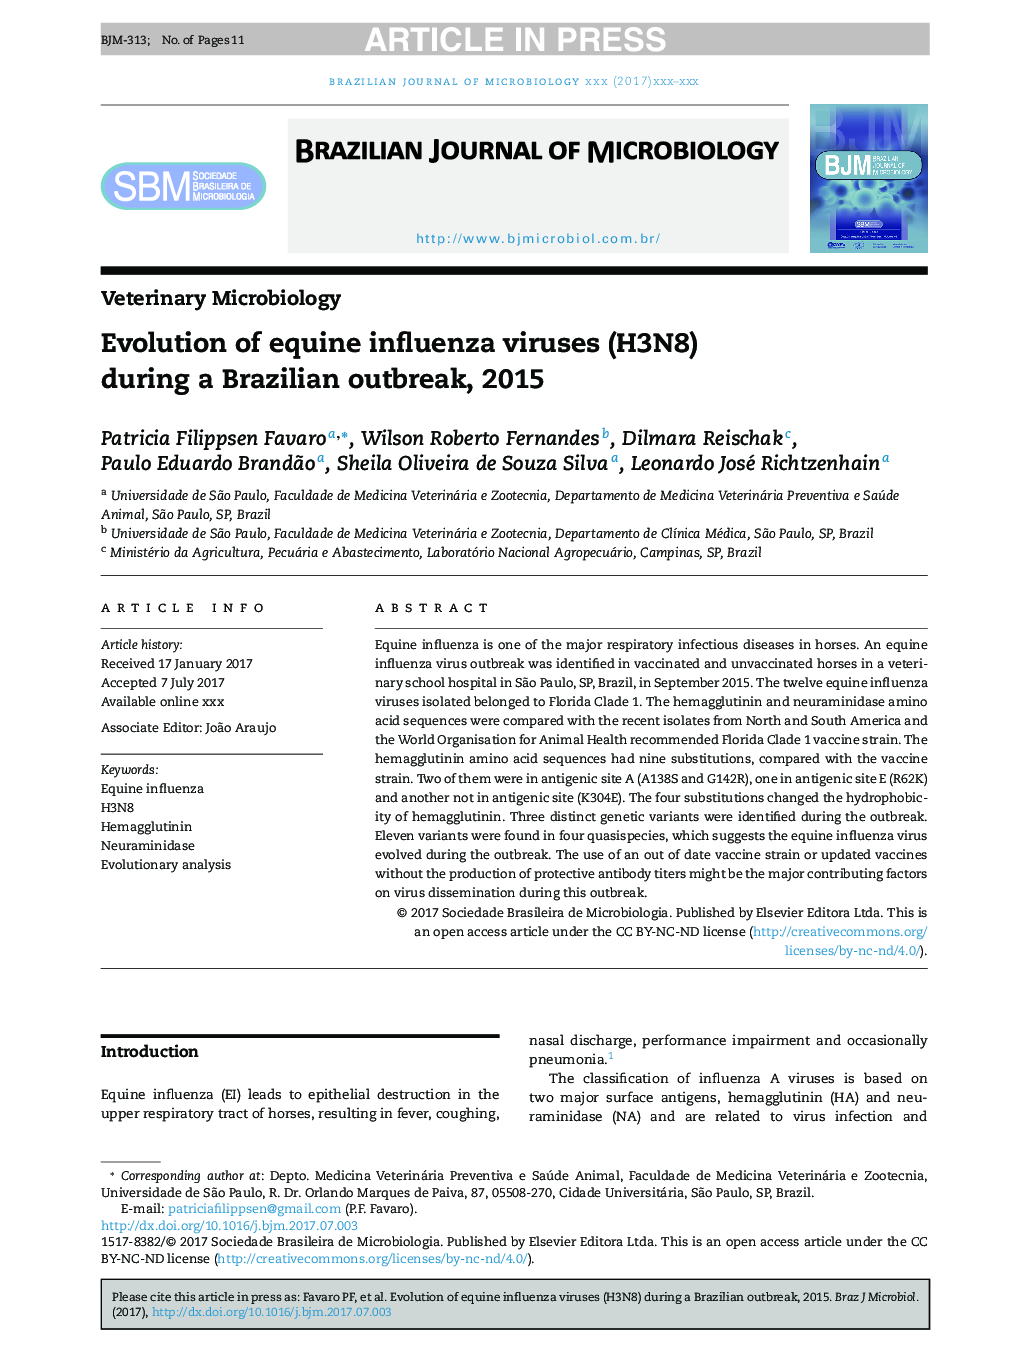 Evolution of equine influenza viruses (H3N8) during a Brazilian outbreak, 2015